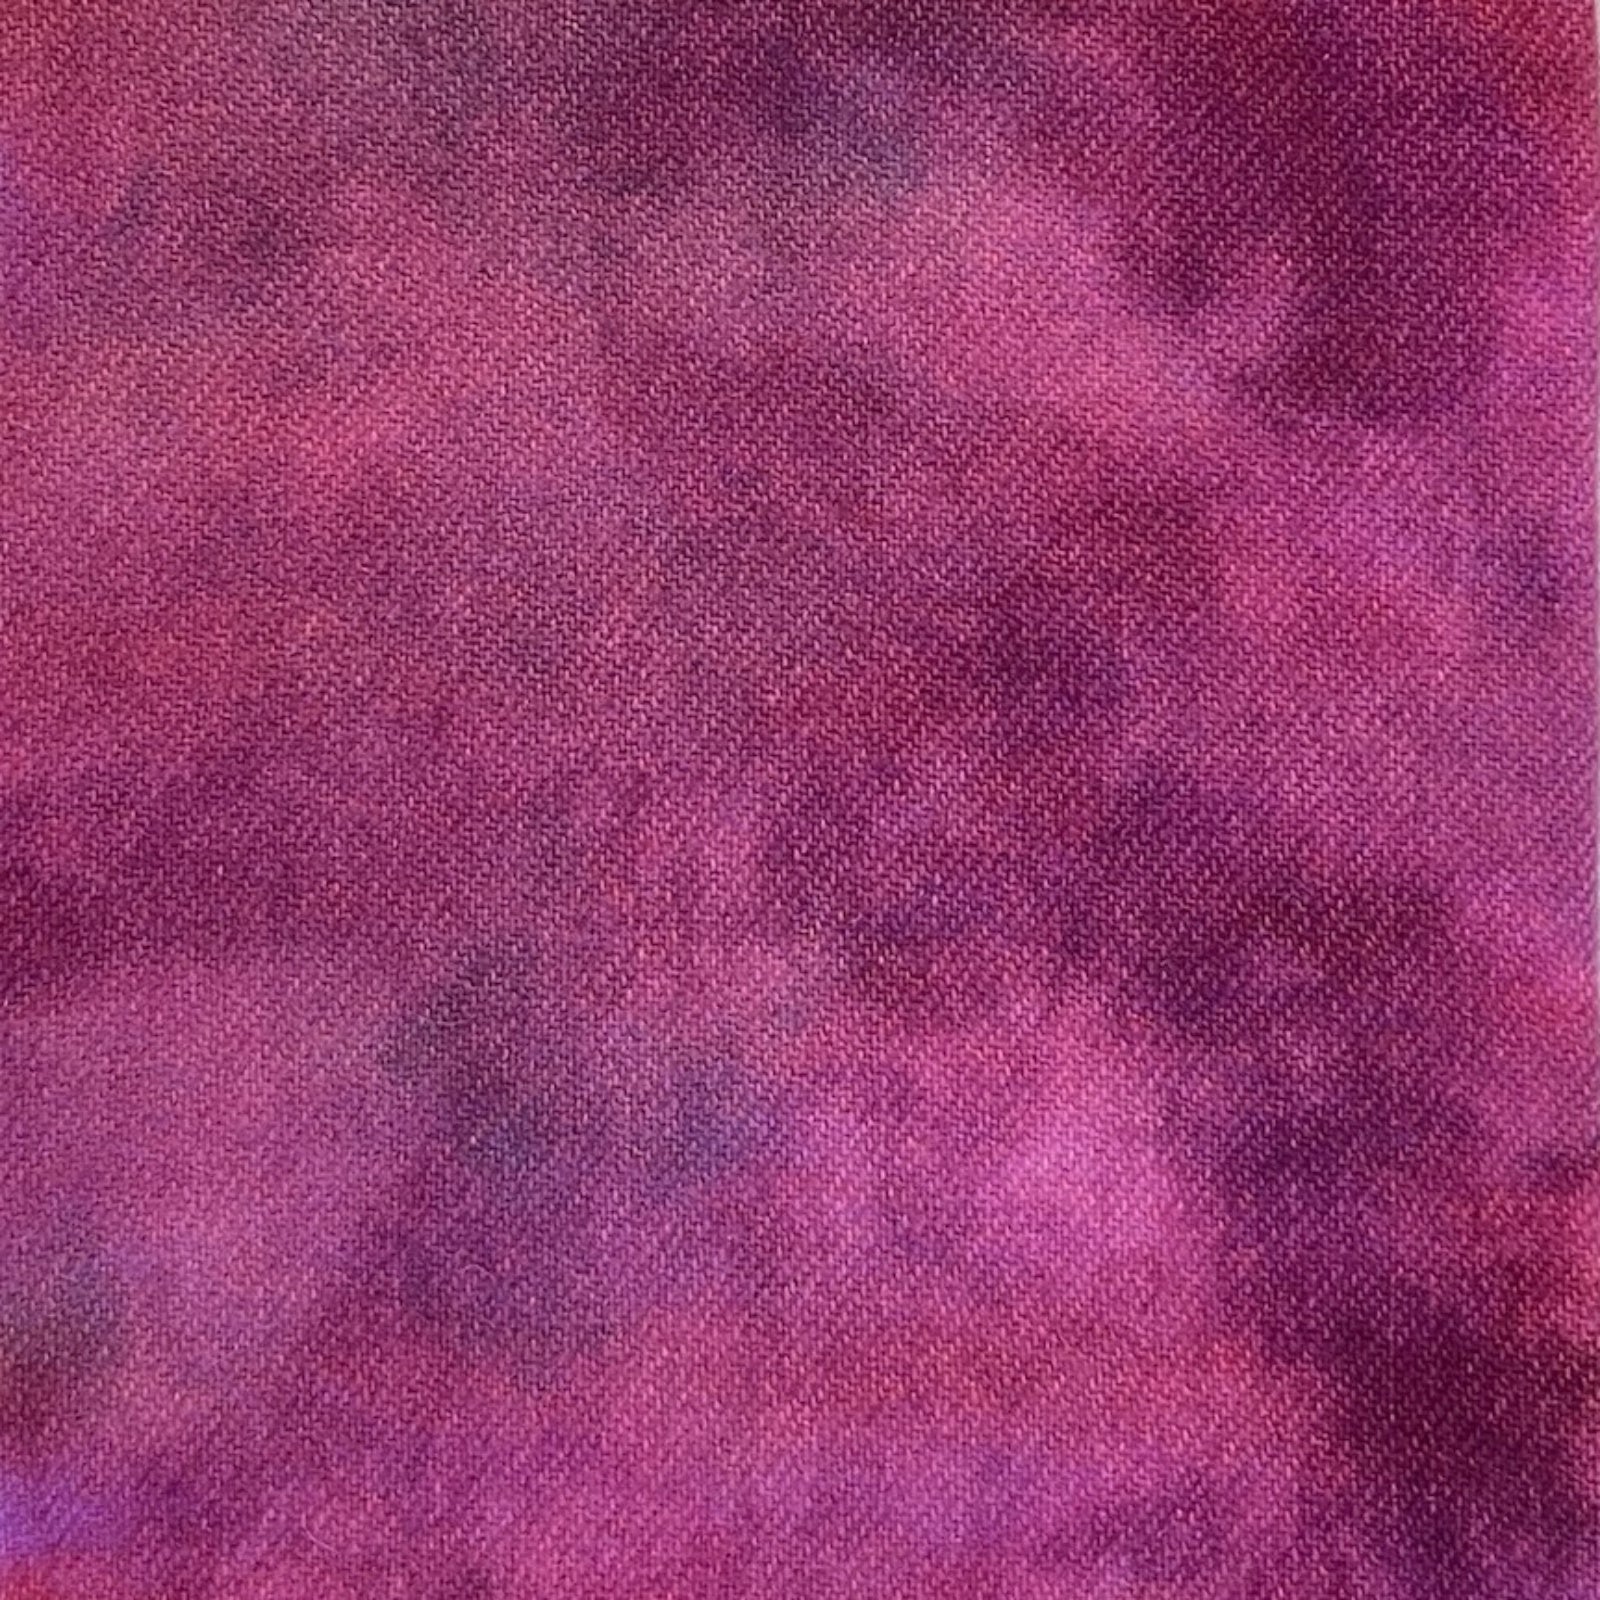 Raspberry - Colorama Spot Dyed Wool for Rug Hooking (CW1025)